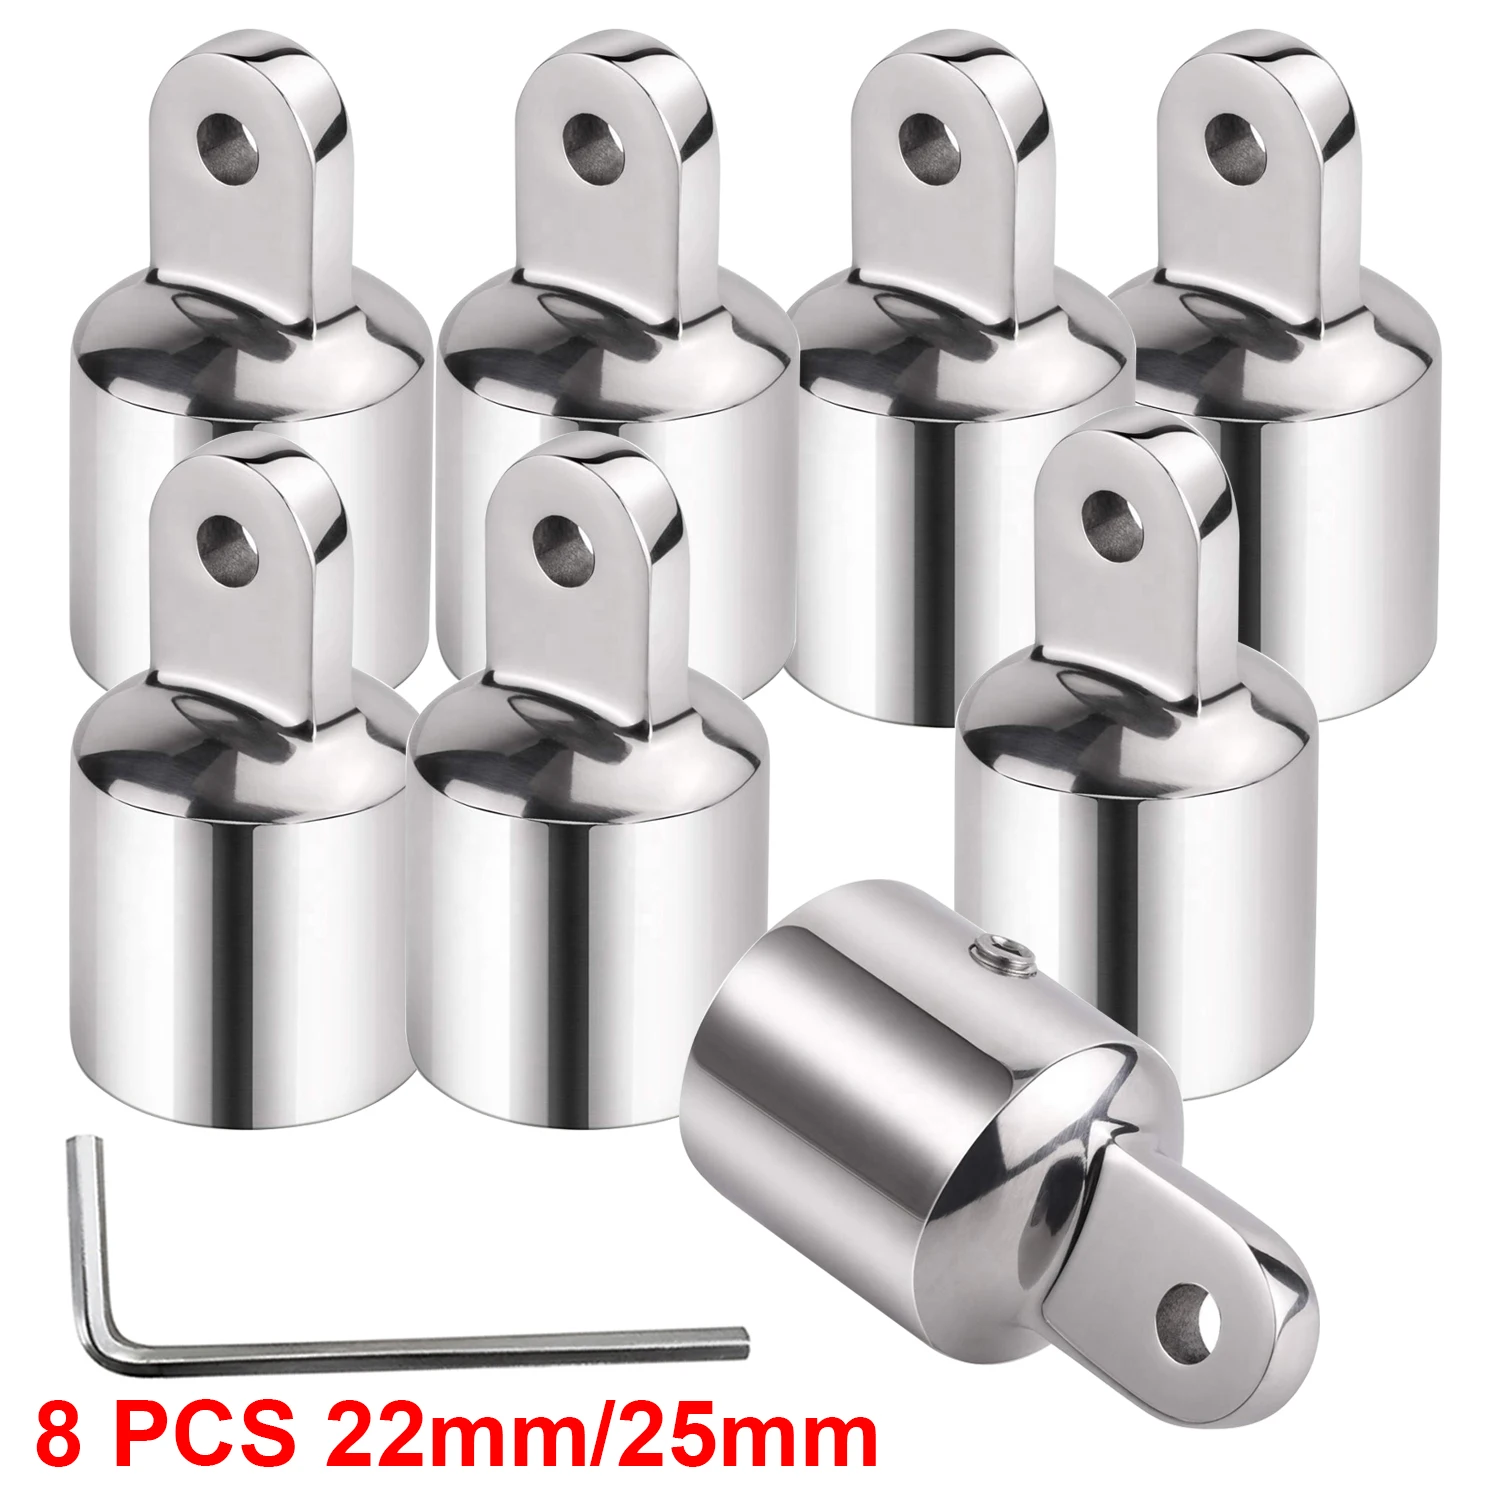 8 PCS 22mm/25mm Bimini Top Hardware Fitting Eye End Cap Stainless Steel 316 External Eye End Boat Canopy Fitting